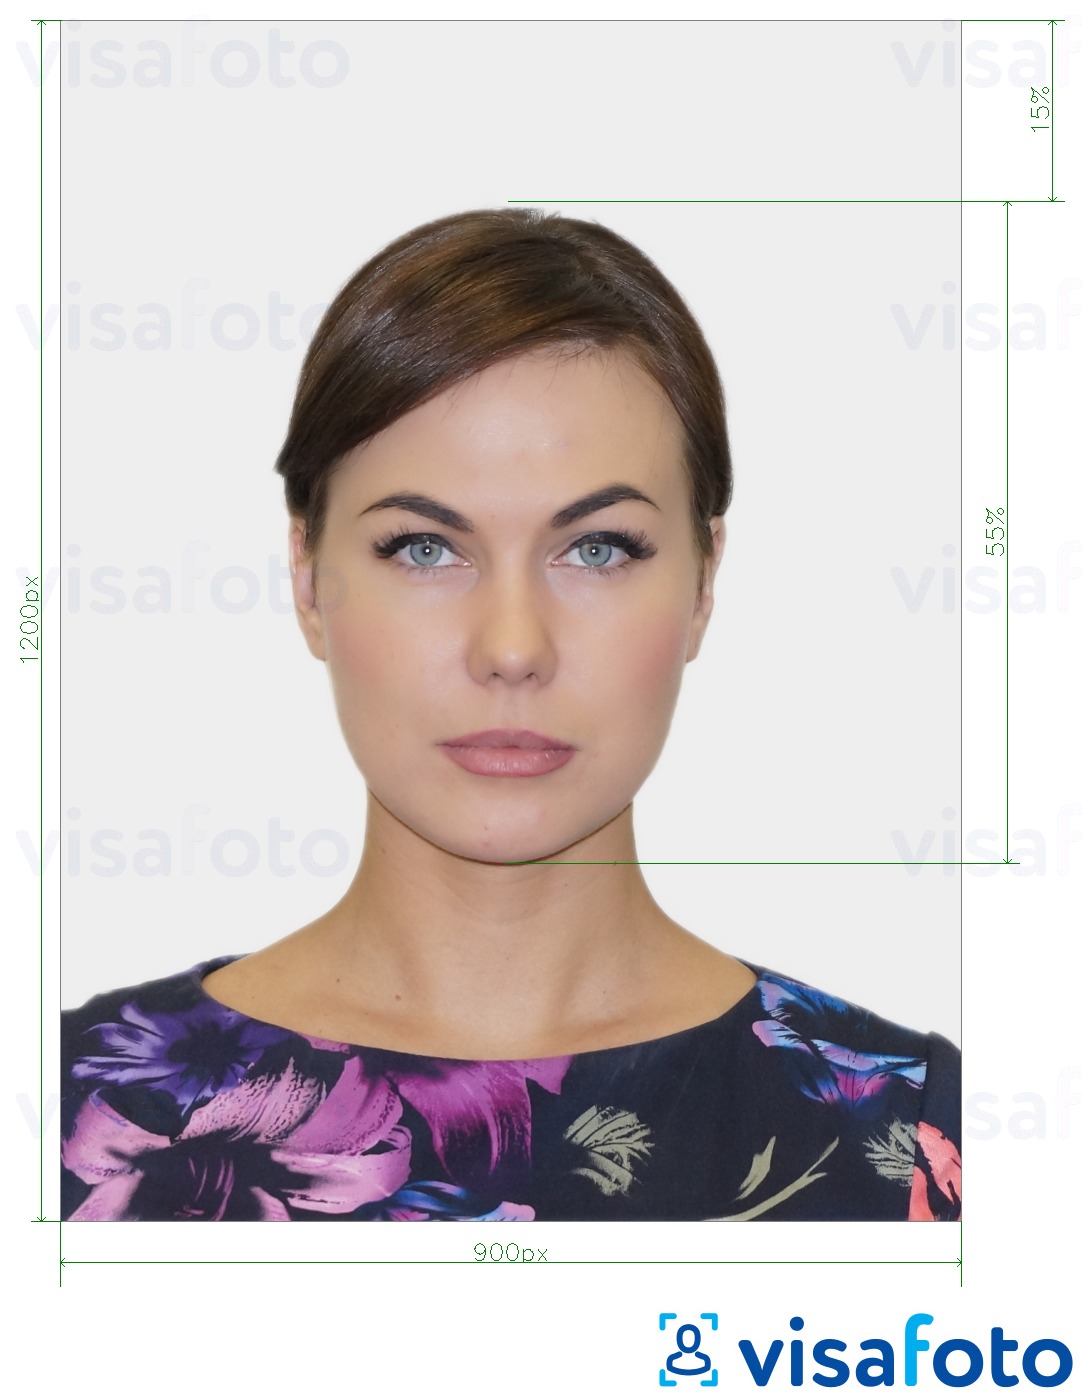 Example of photo for UK Bus pass online form with exact size specification